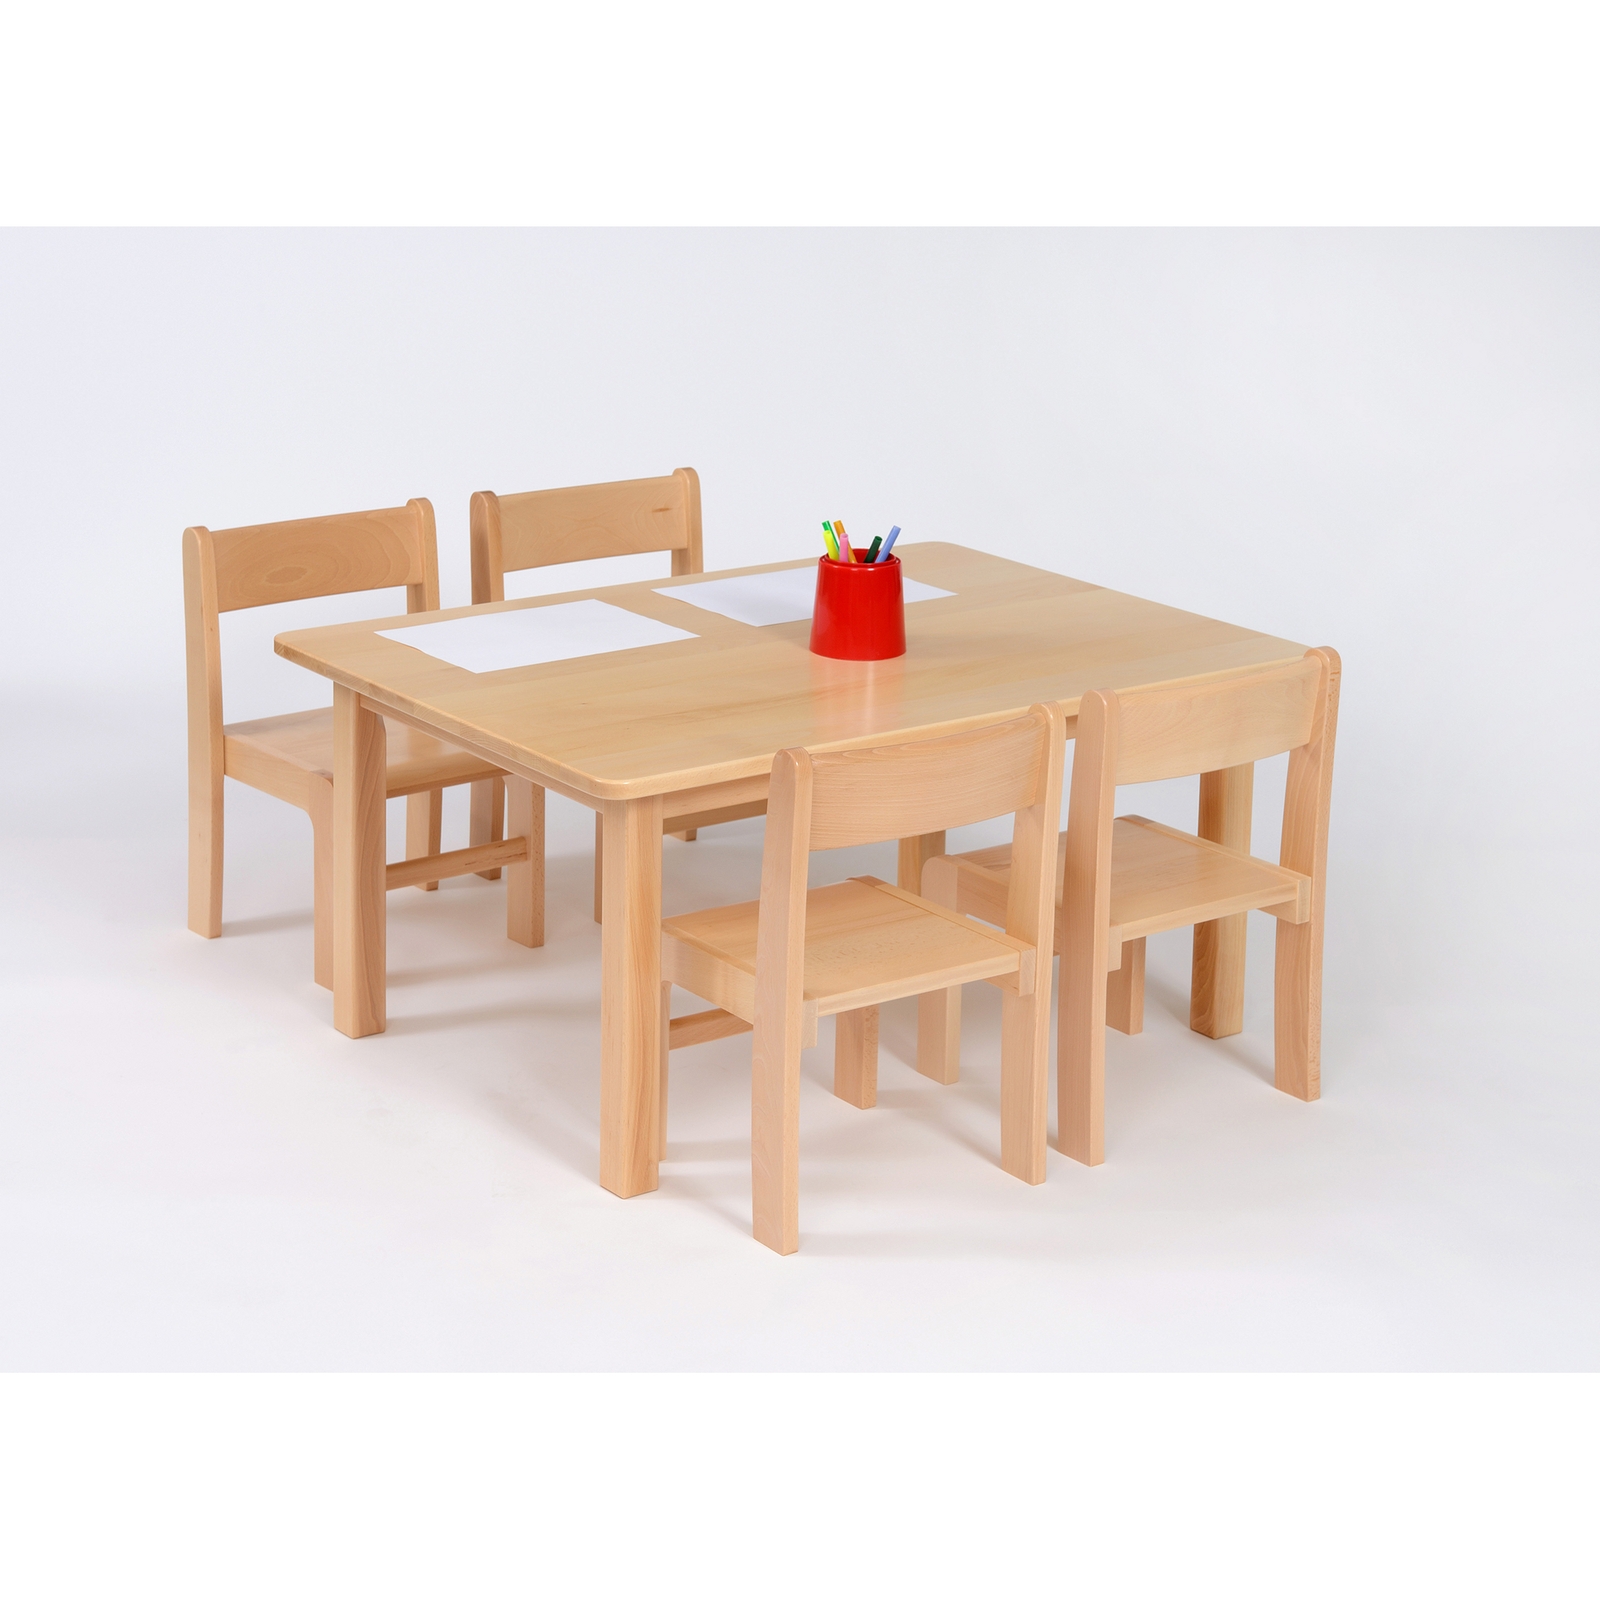 Galt Rectangular Table with 4 Chairs - 2-3 Year Olds - Per Set